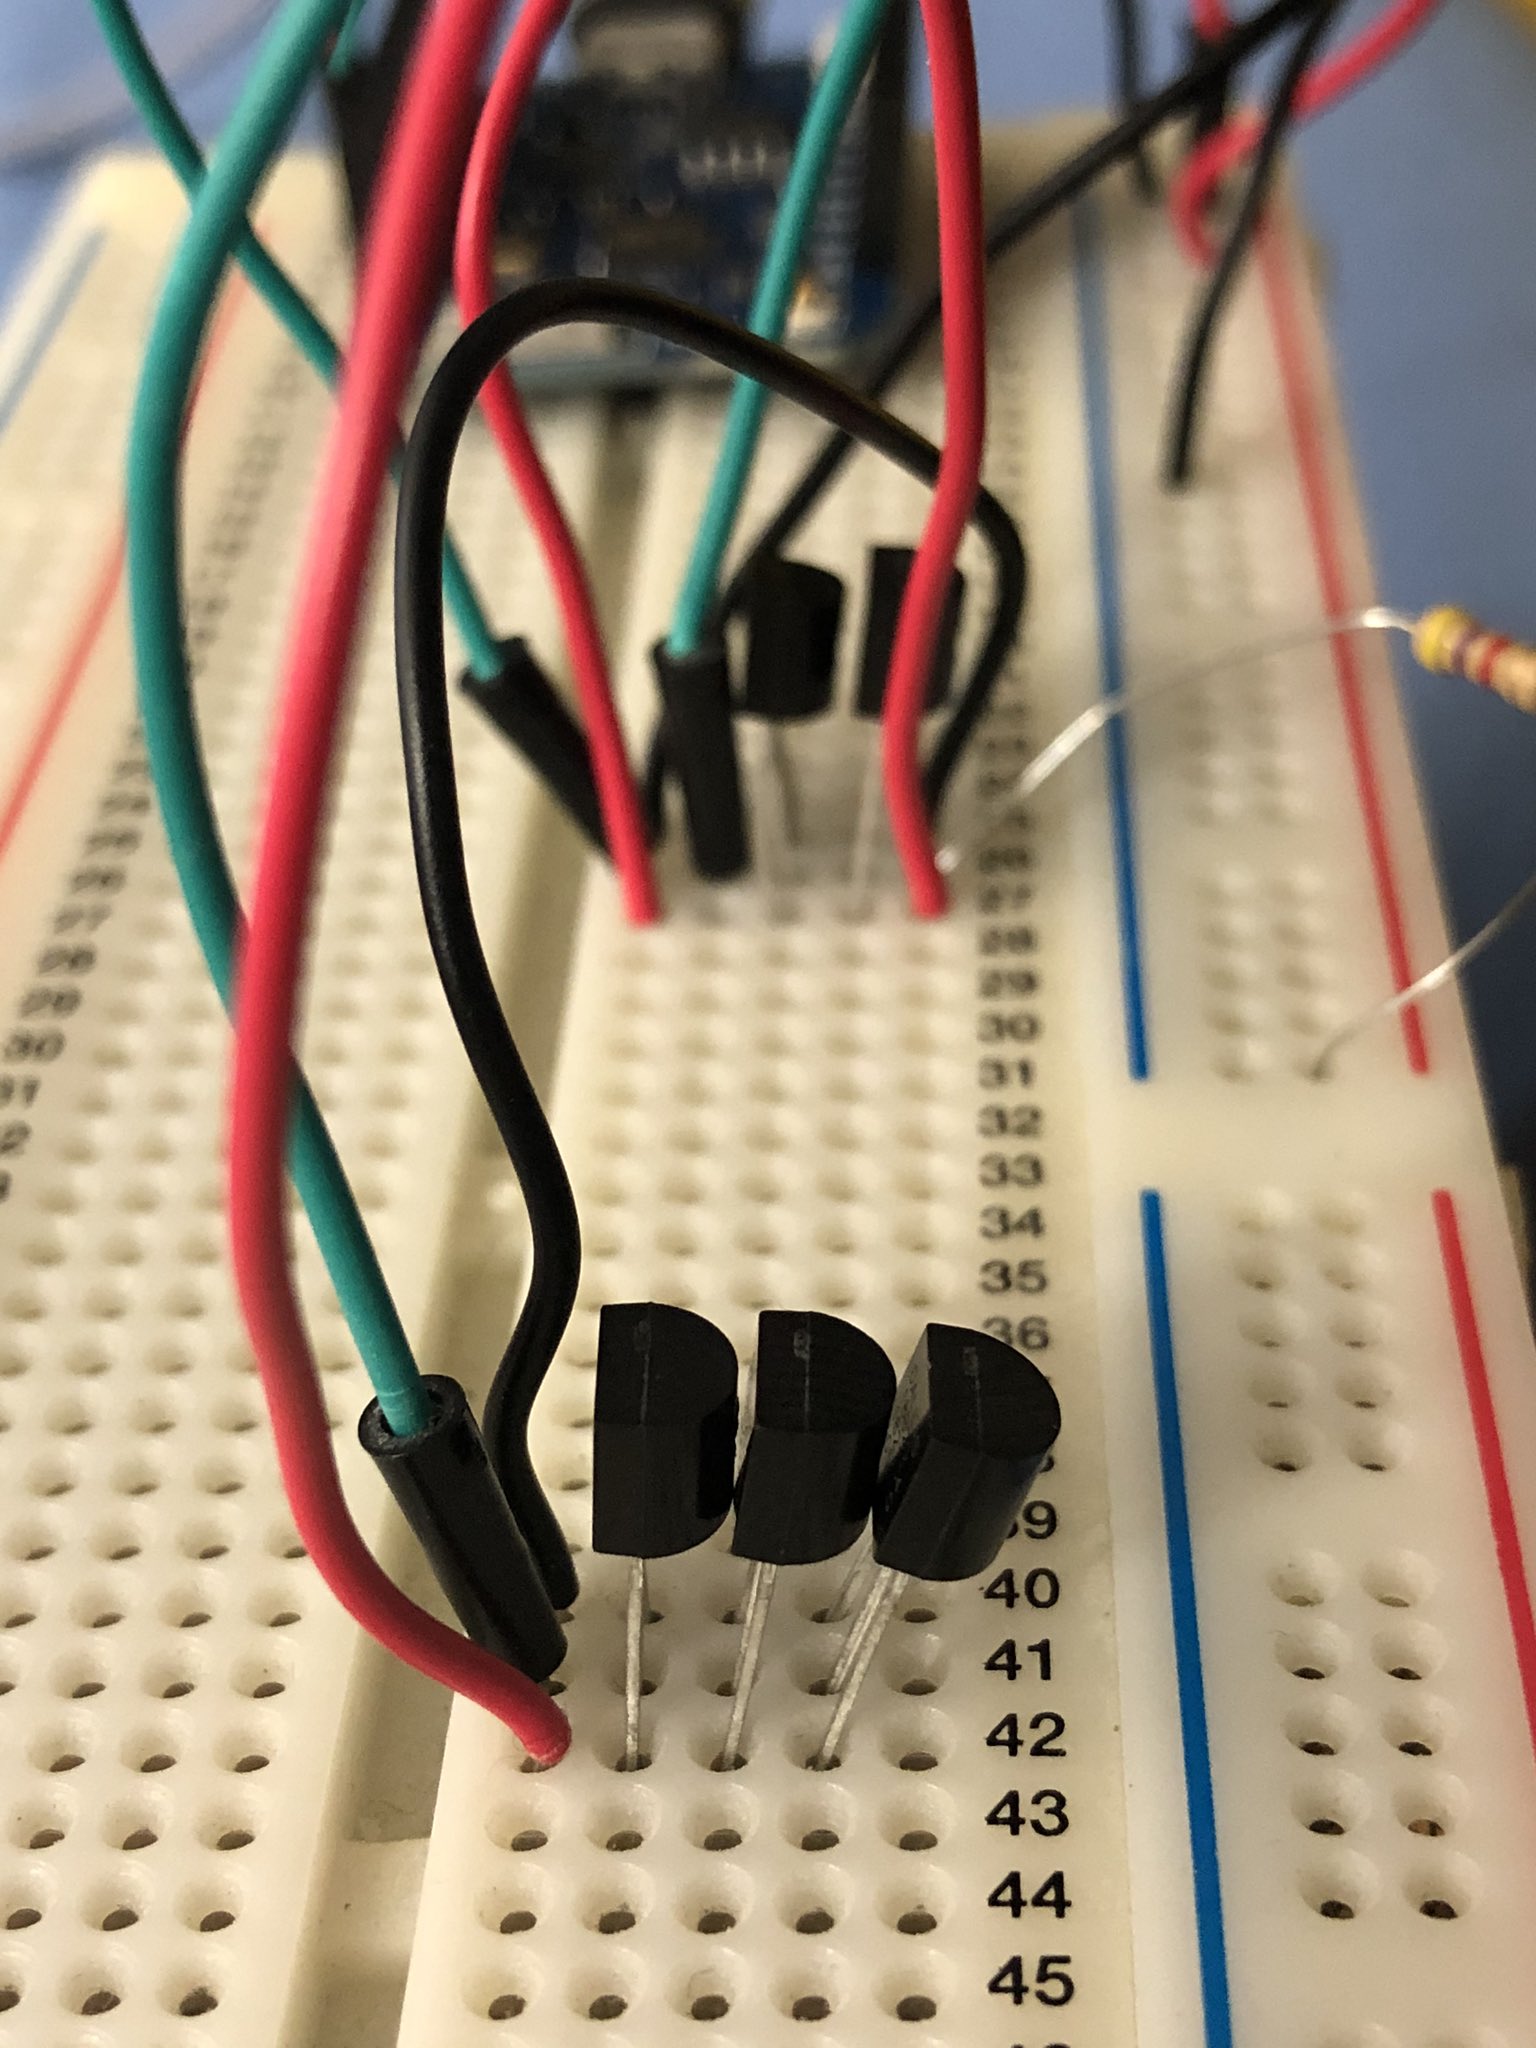 DS18B20 temperature sensors being tested